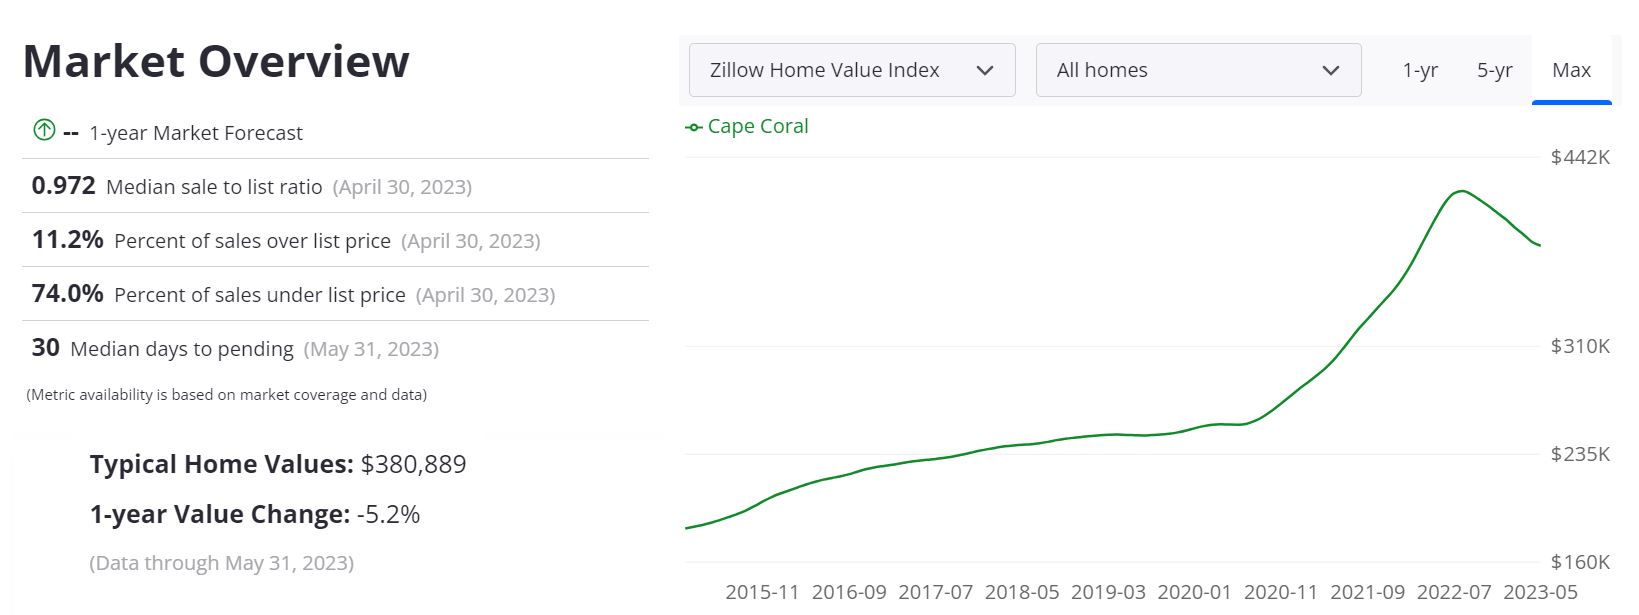 Cape Coral Housing Market Costs, Traits, Forecast 2023